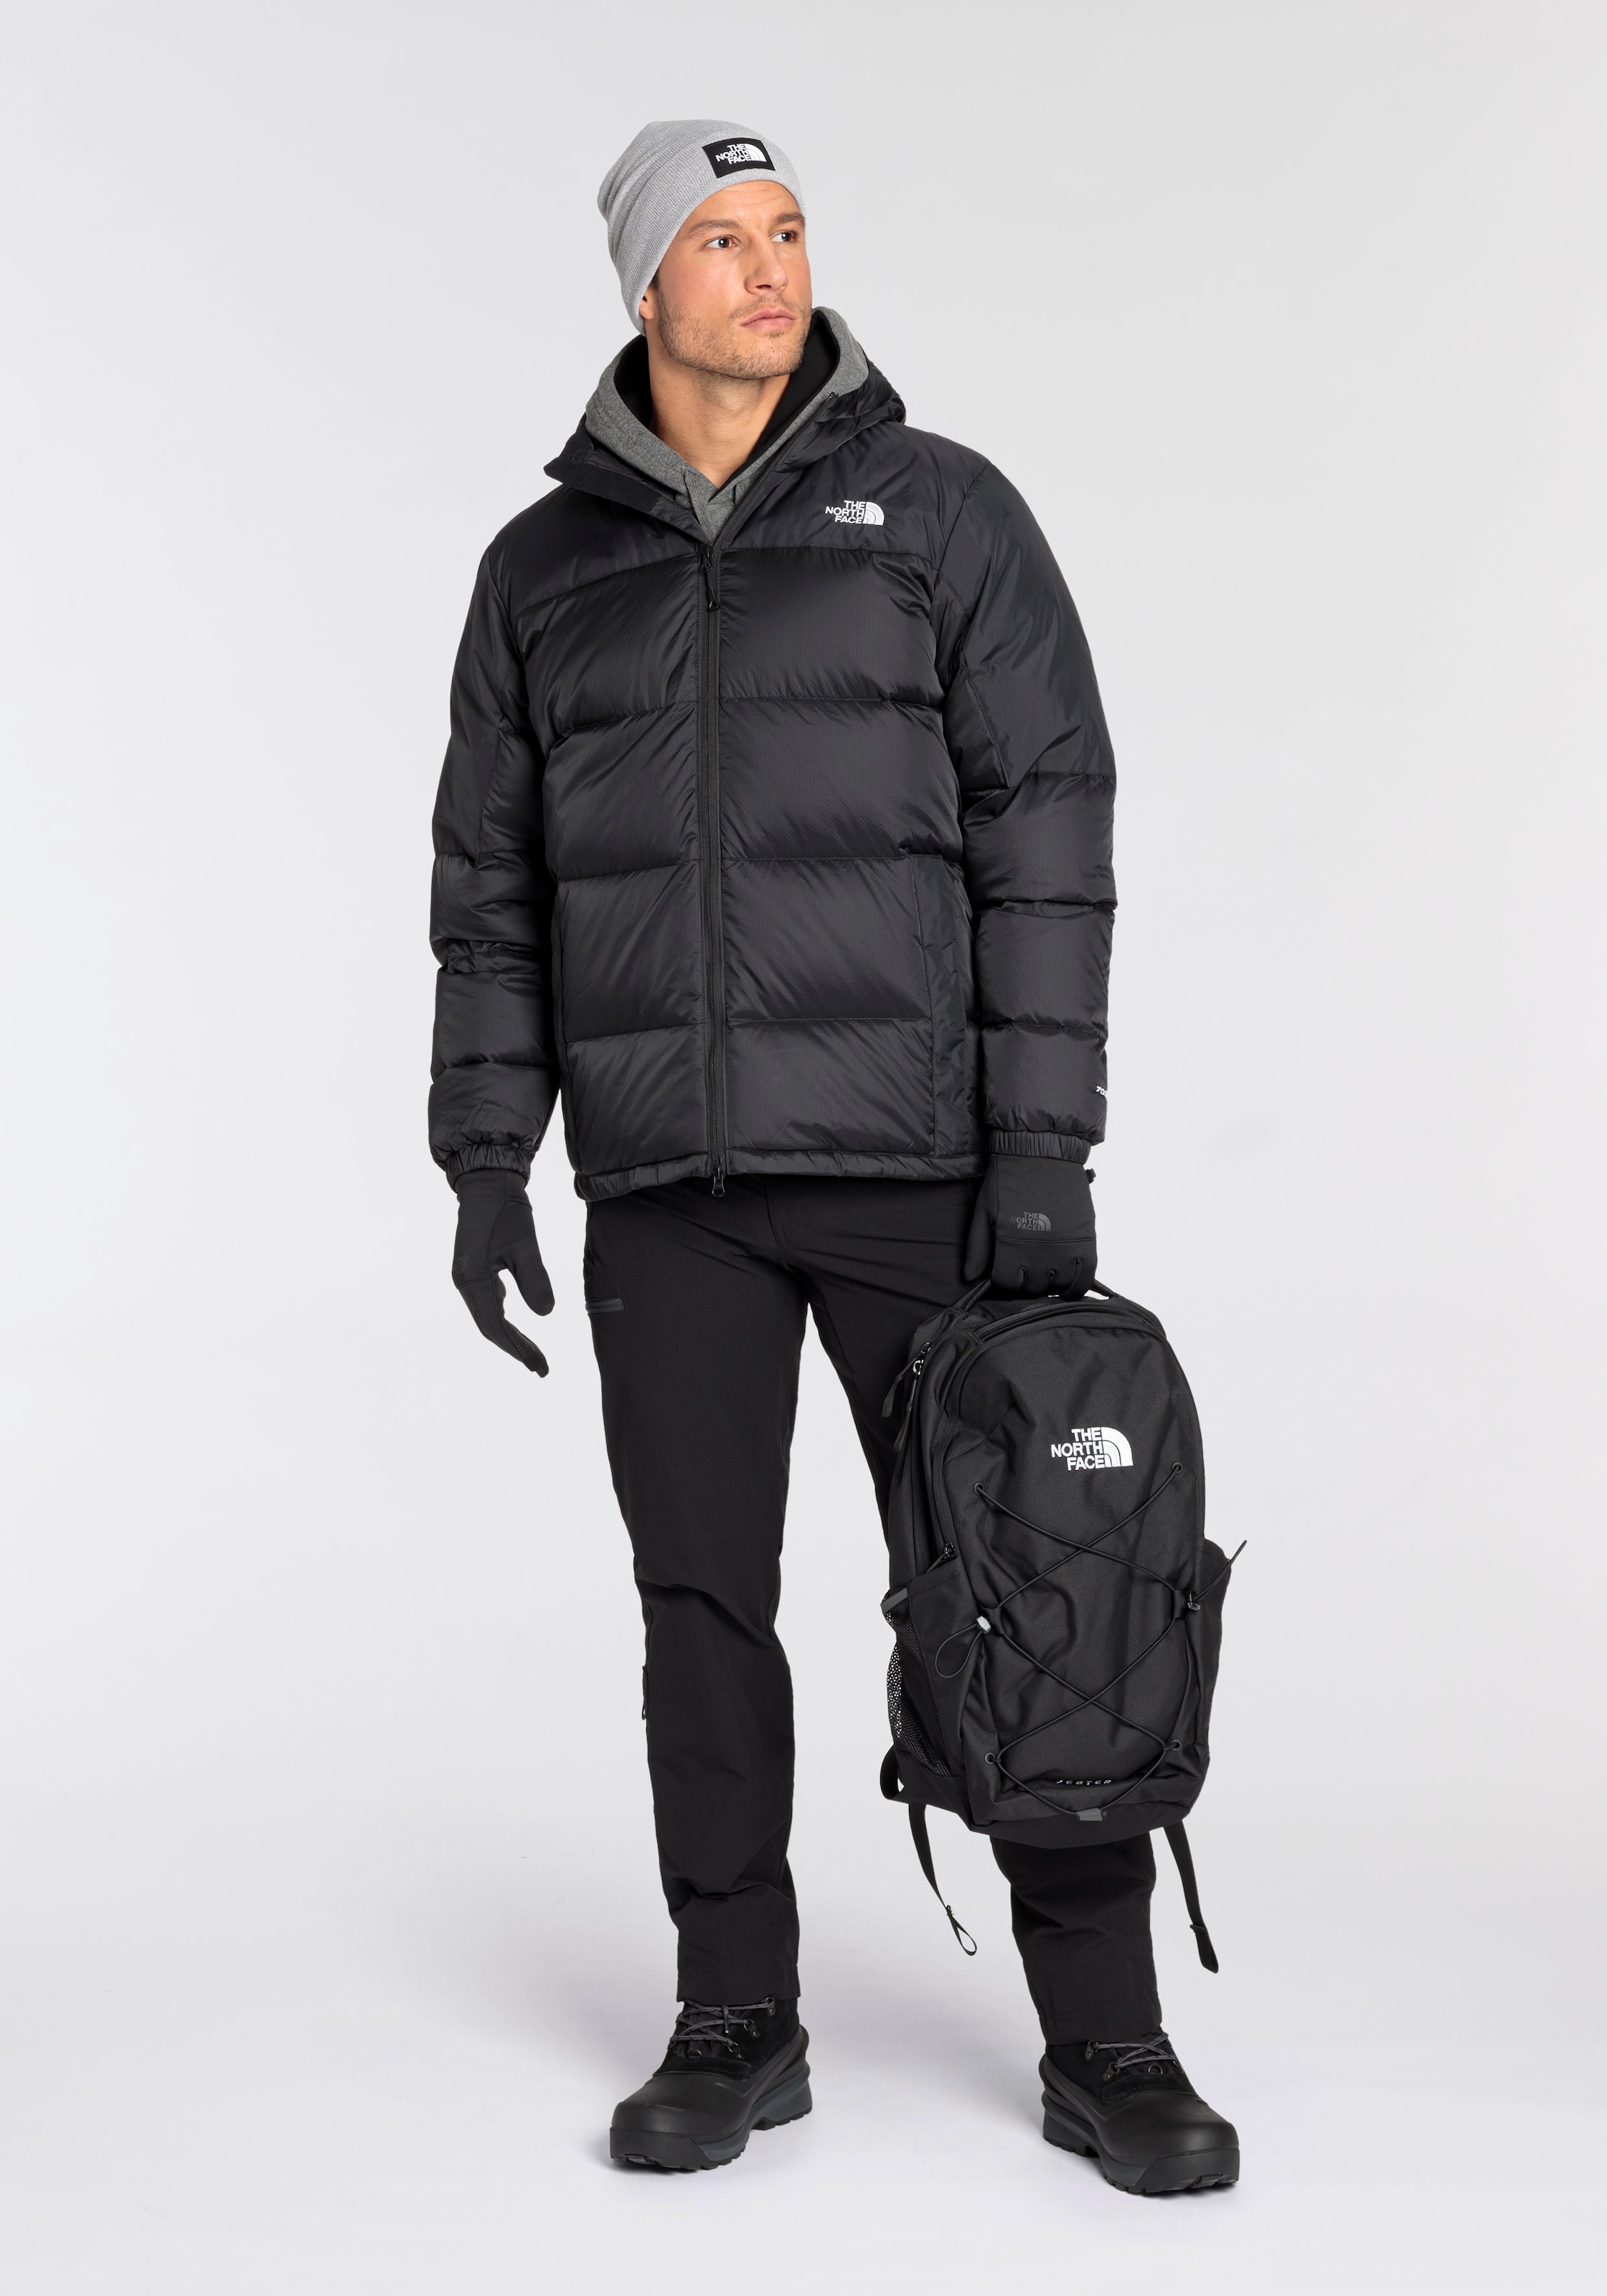 The North Face Multisporthandschuhe »ETIP« bei ♕